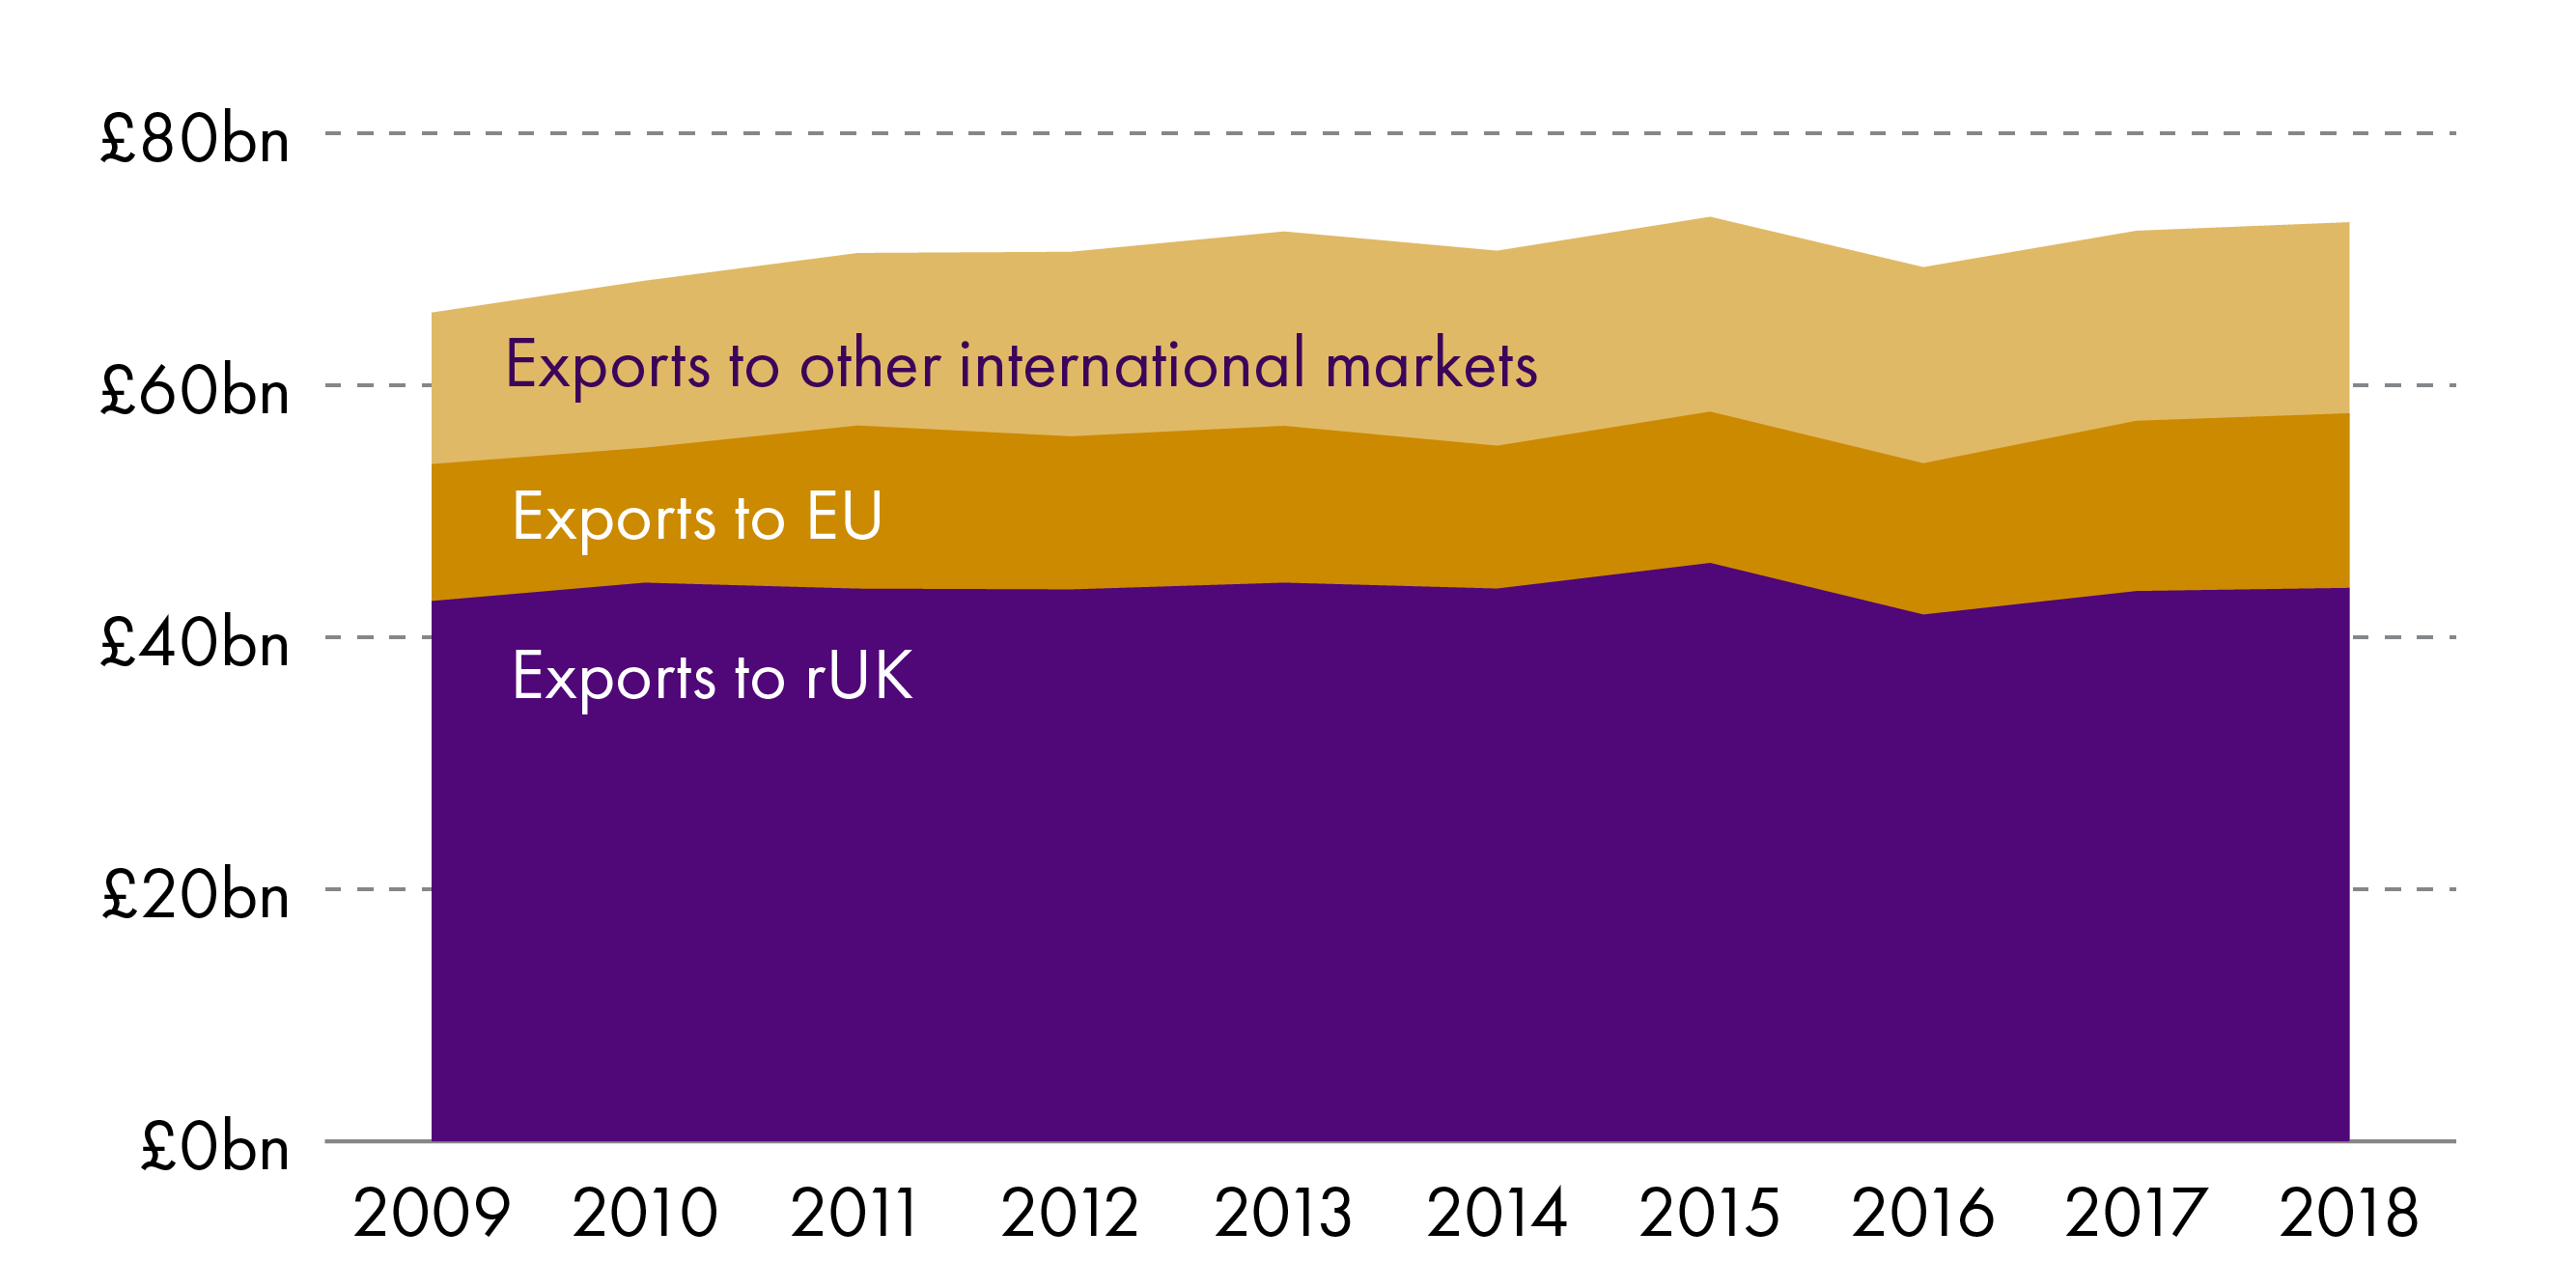 Between 2009 and 2018 exports to the rest of  the UK increased by 2.4% in real terms, while exports to the EU and other international destinations both increased by over 25%